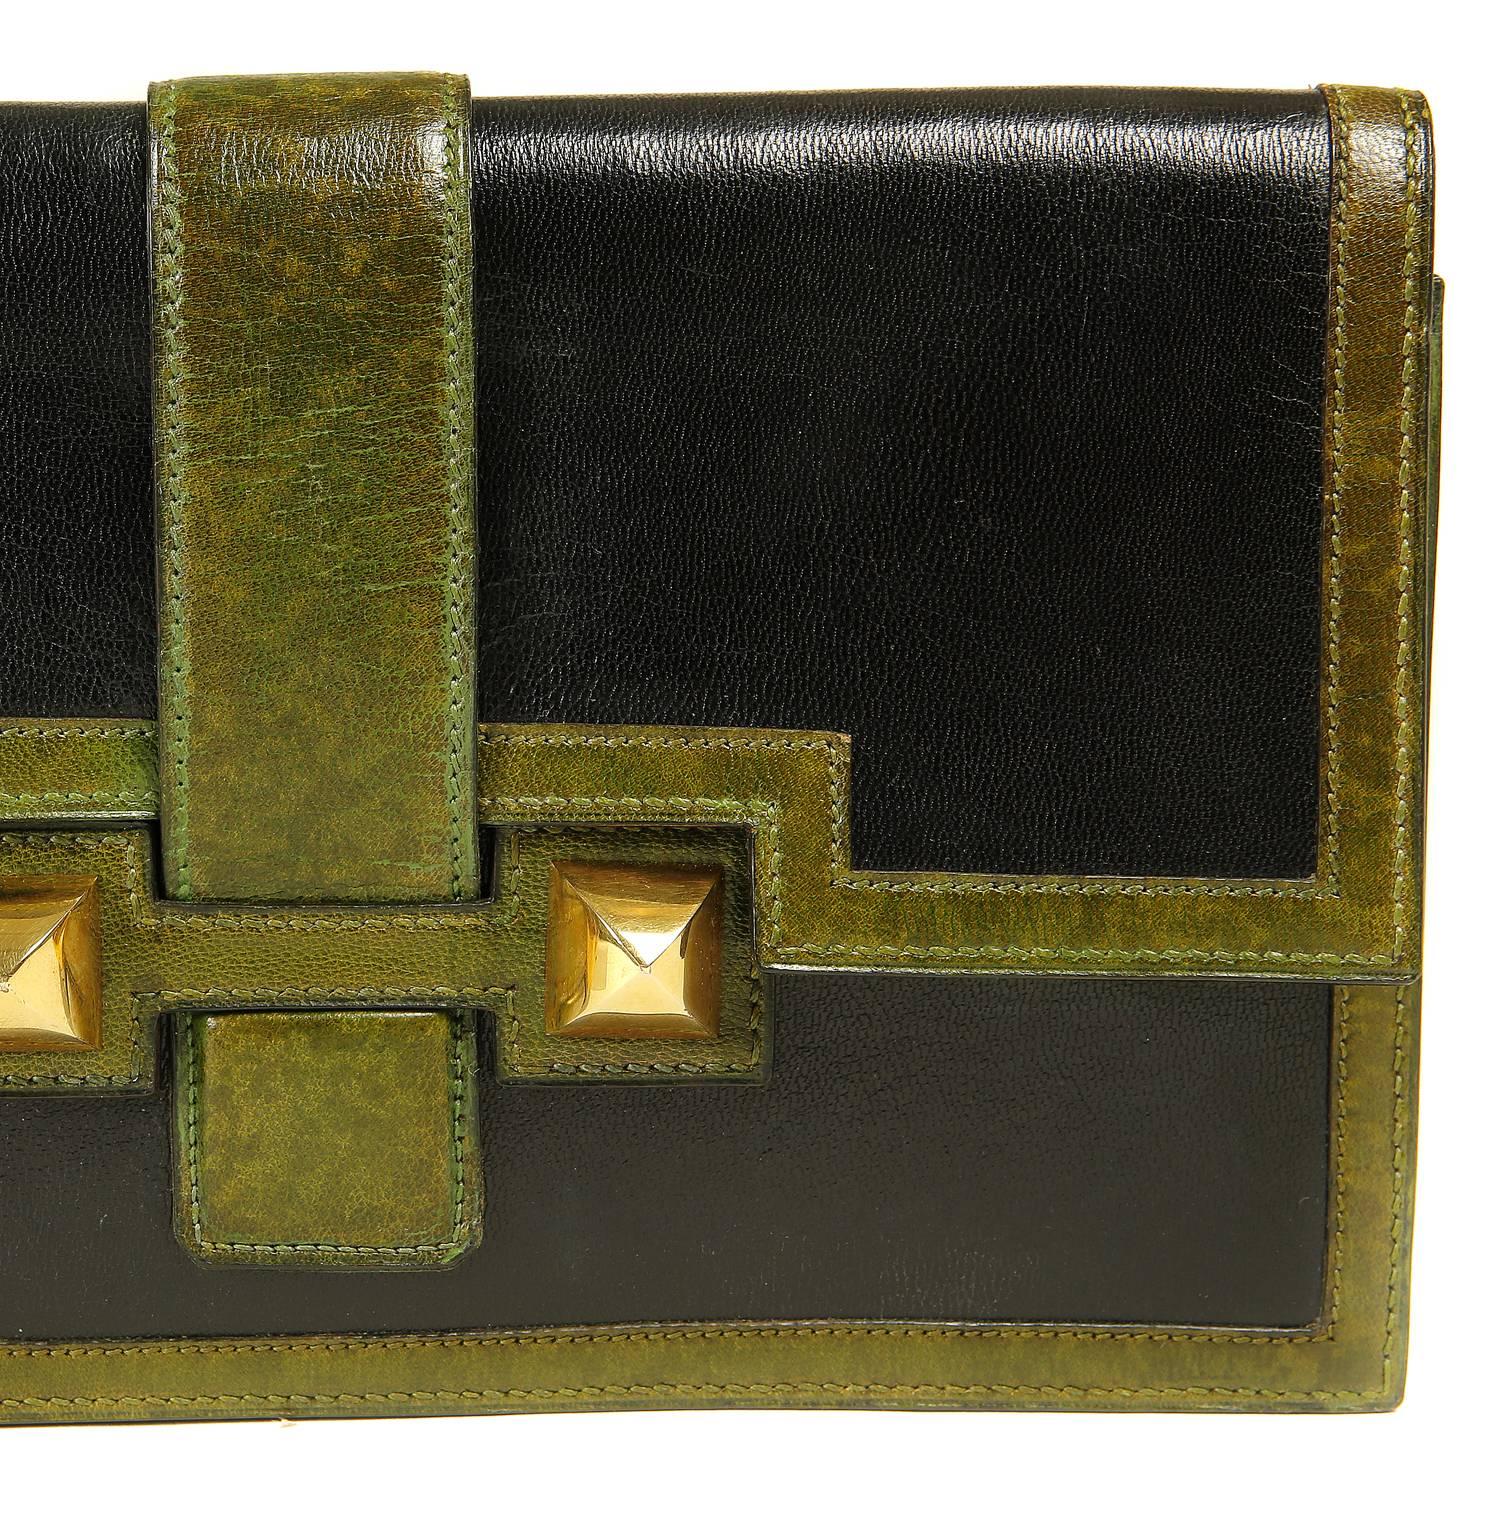 Hermès Black and Green Leather Clutch with chain strap For Sale 2